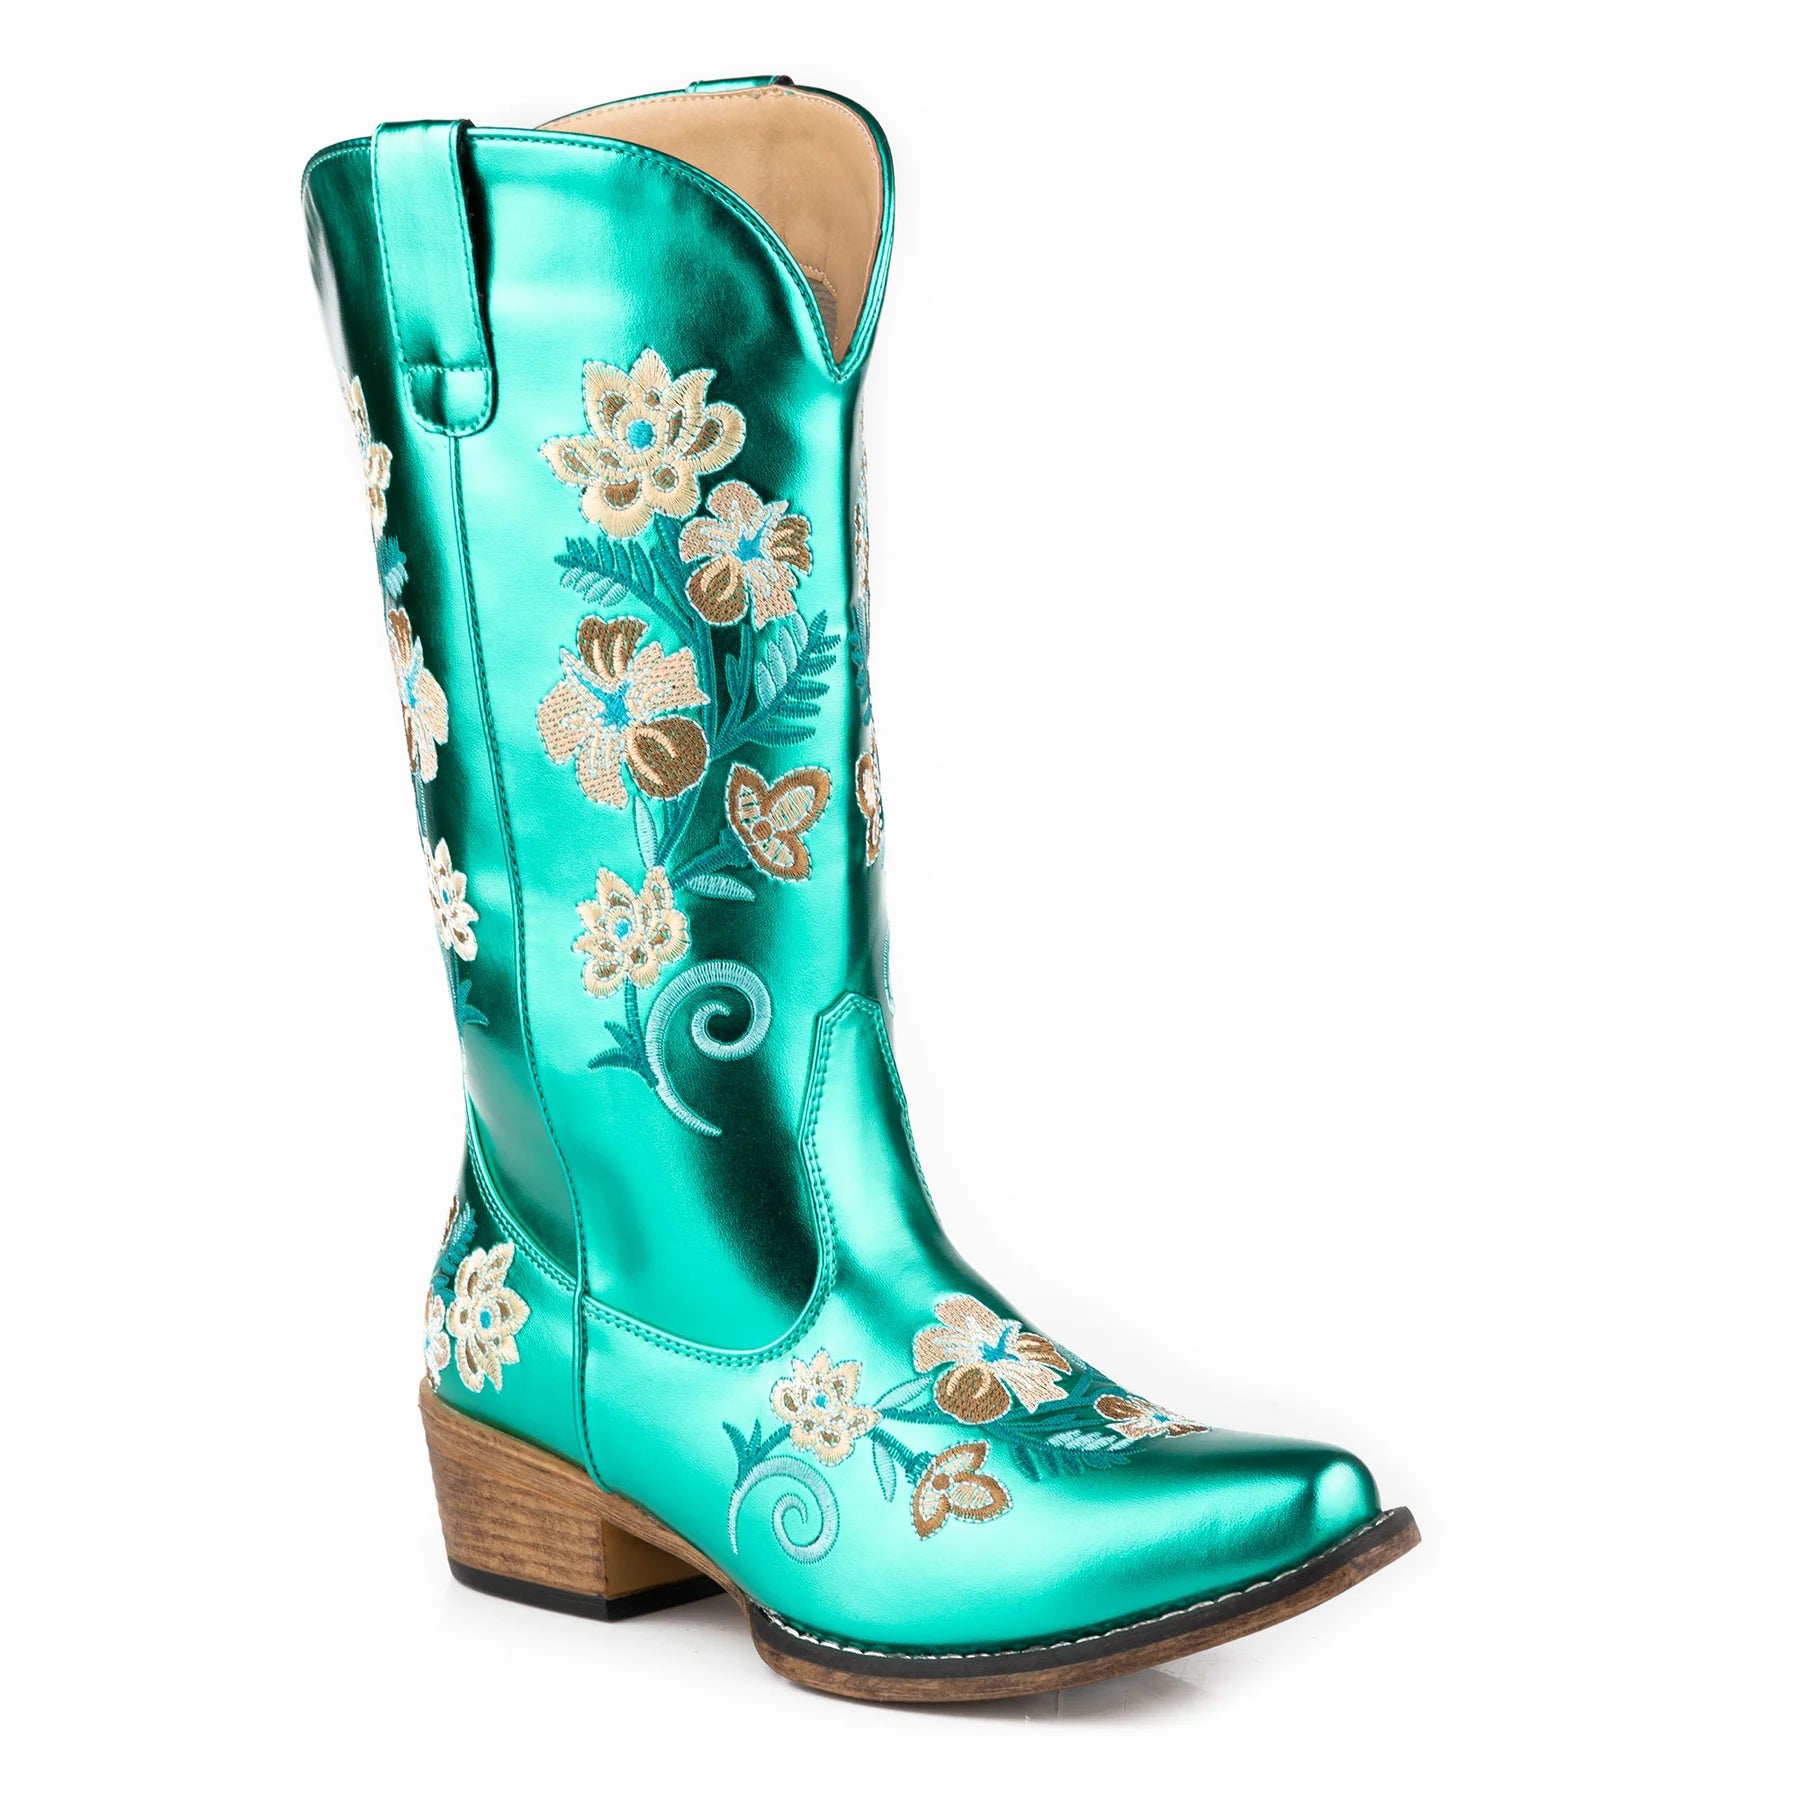 Roper Wmns Riley Floral Emerald Green Metallic - Mothers Day Sale